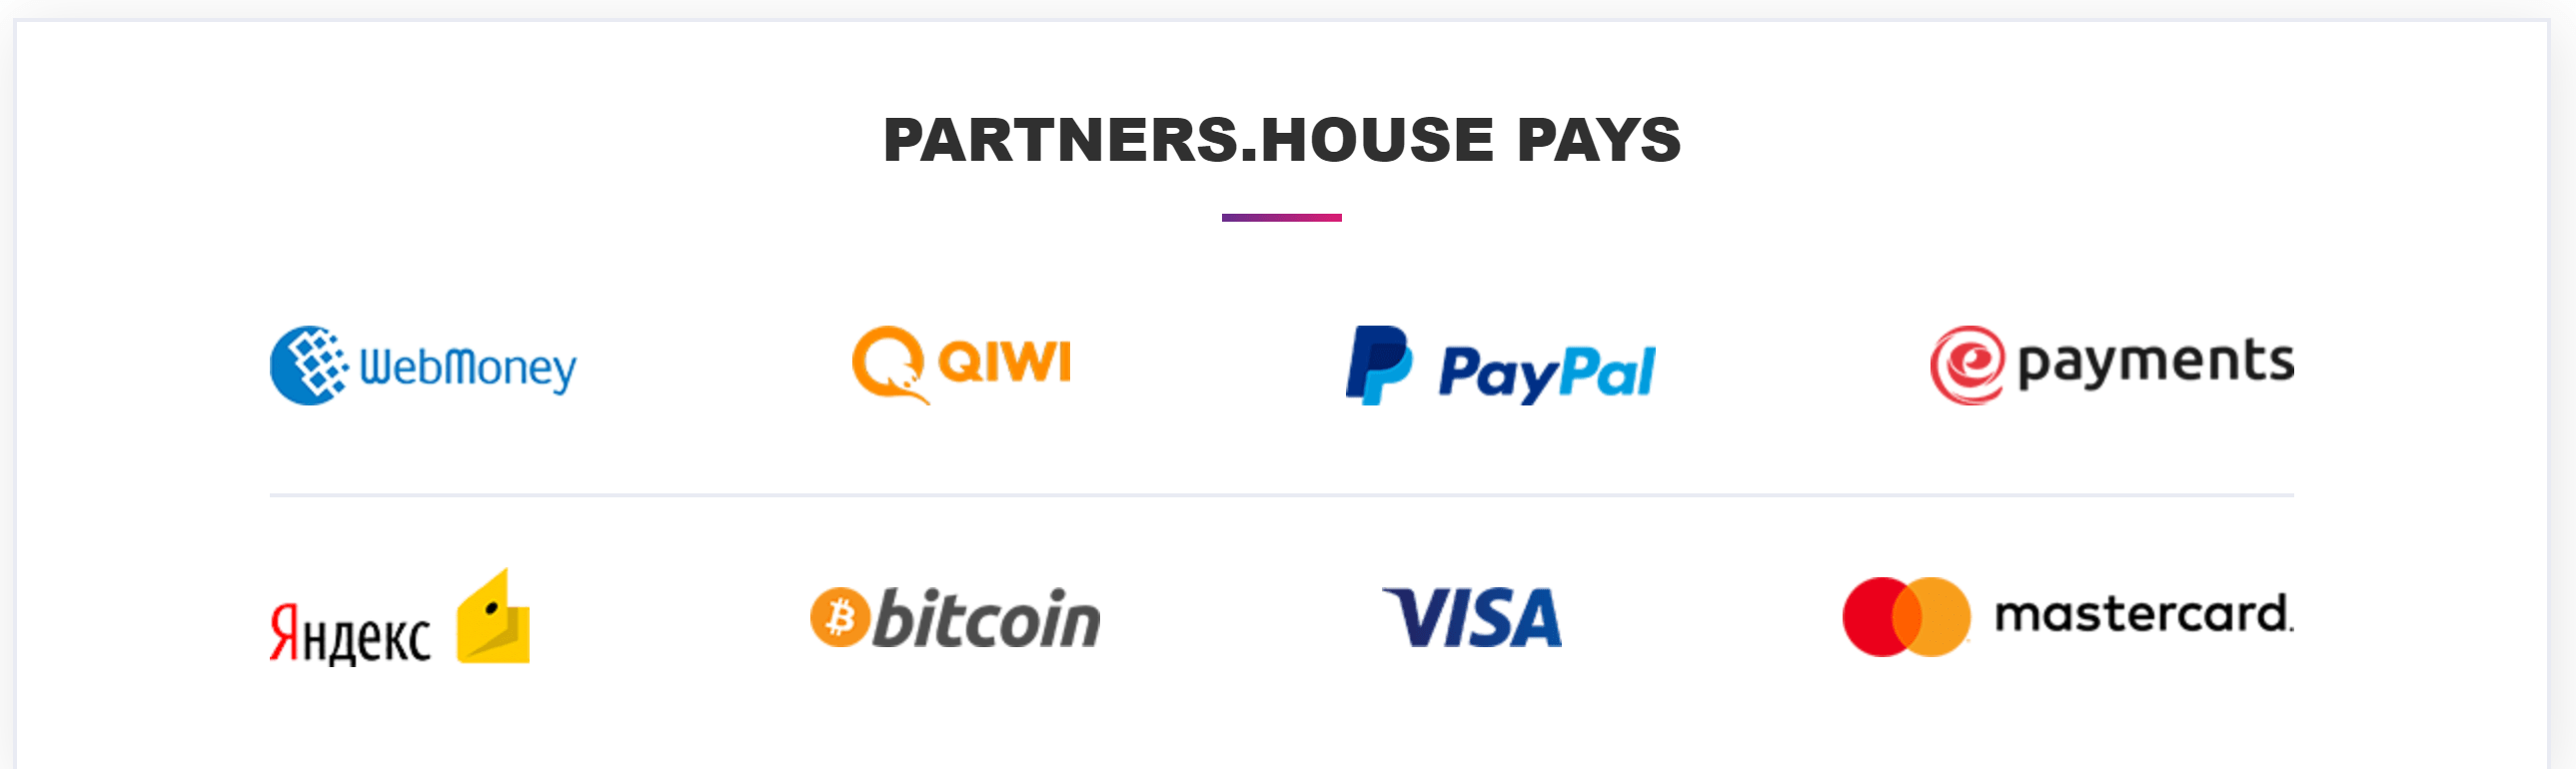 Partners house push ad network